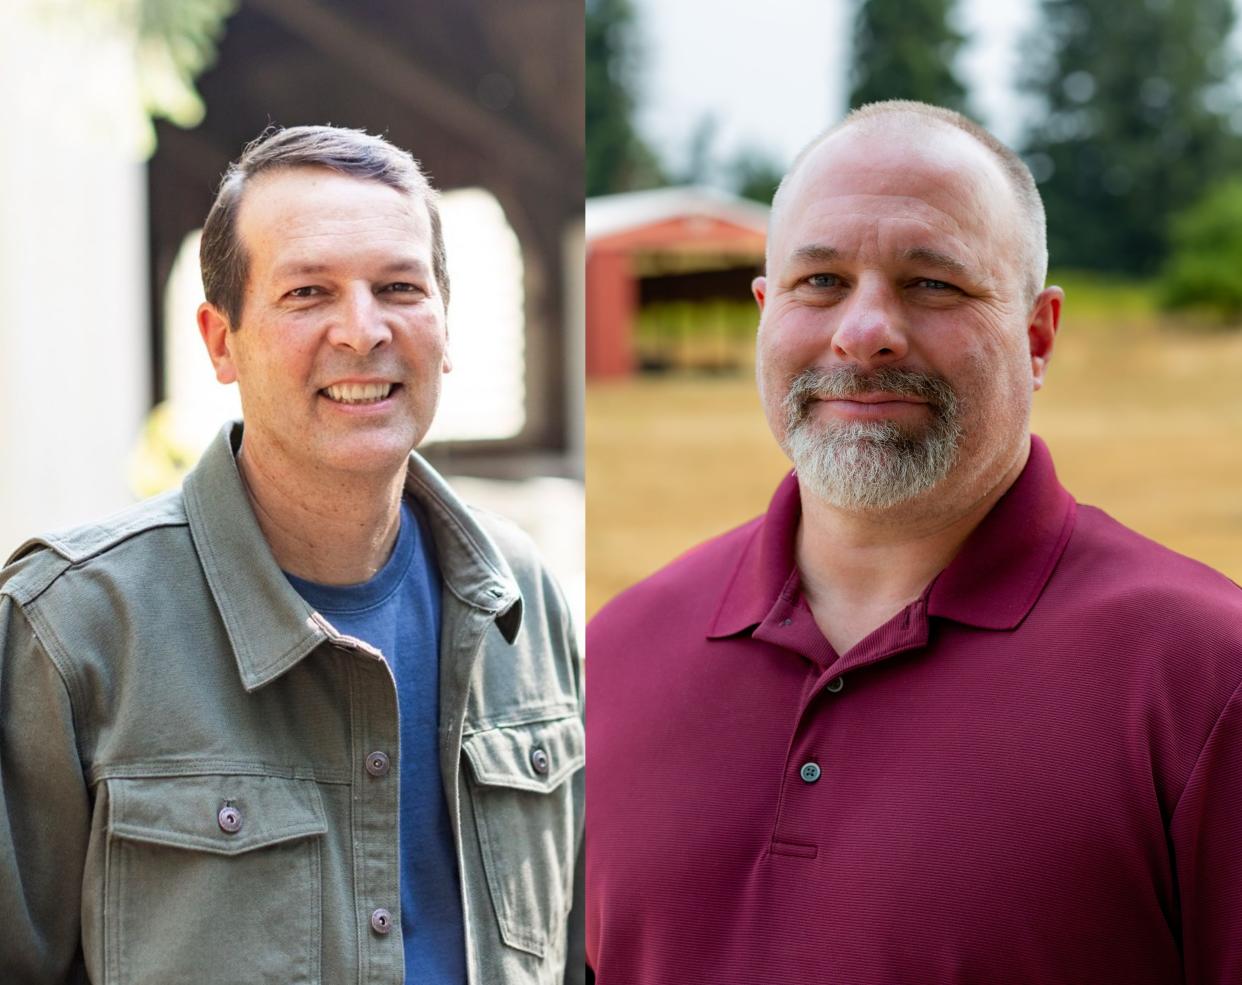 Darin Harbick and Charlie Conrad are candidates running in the Republican primary for Oregon House District 12.